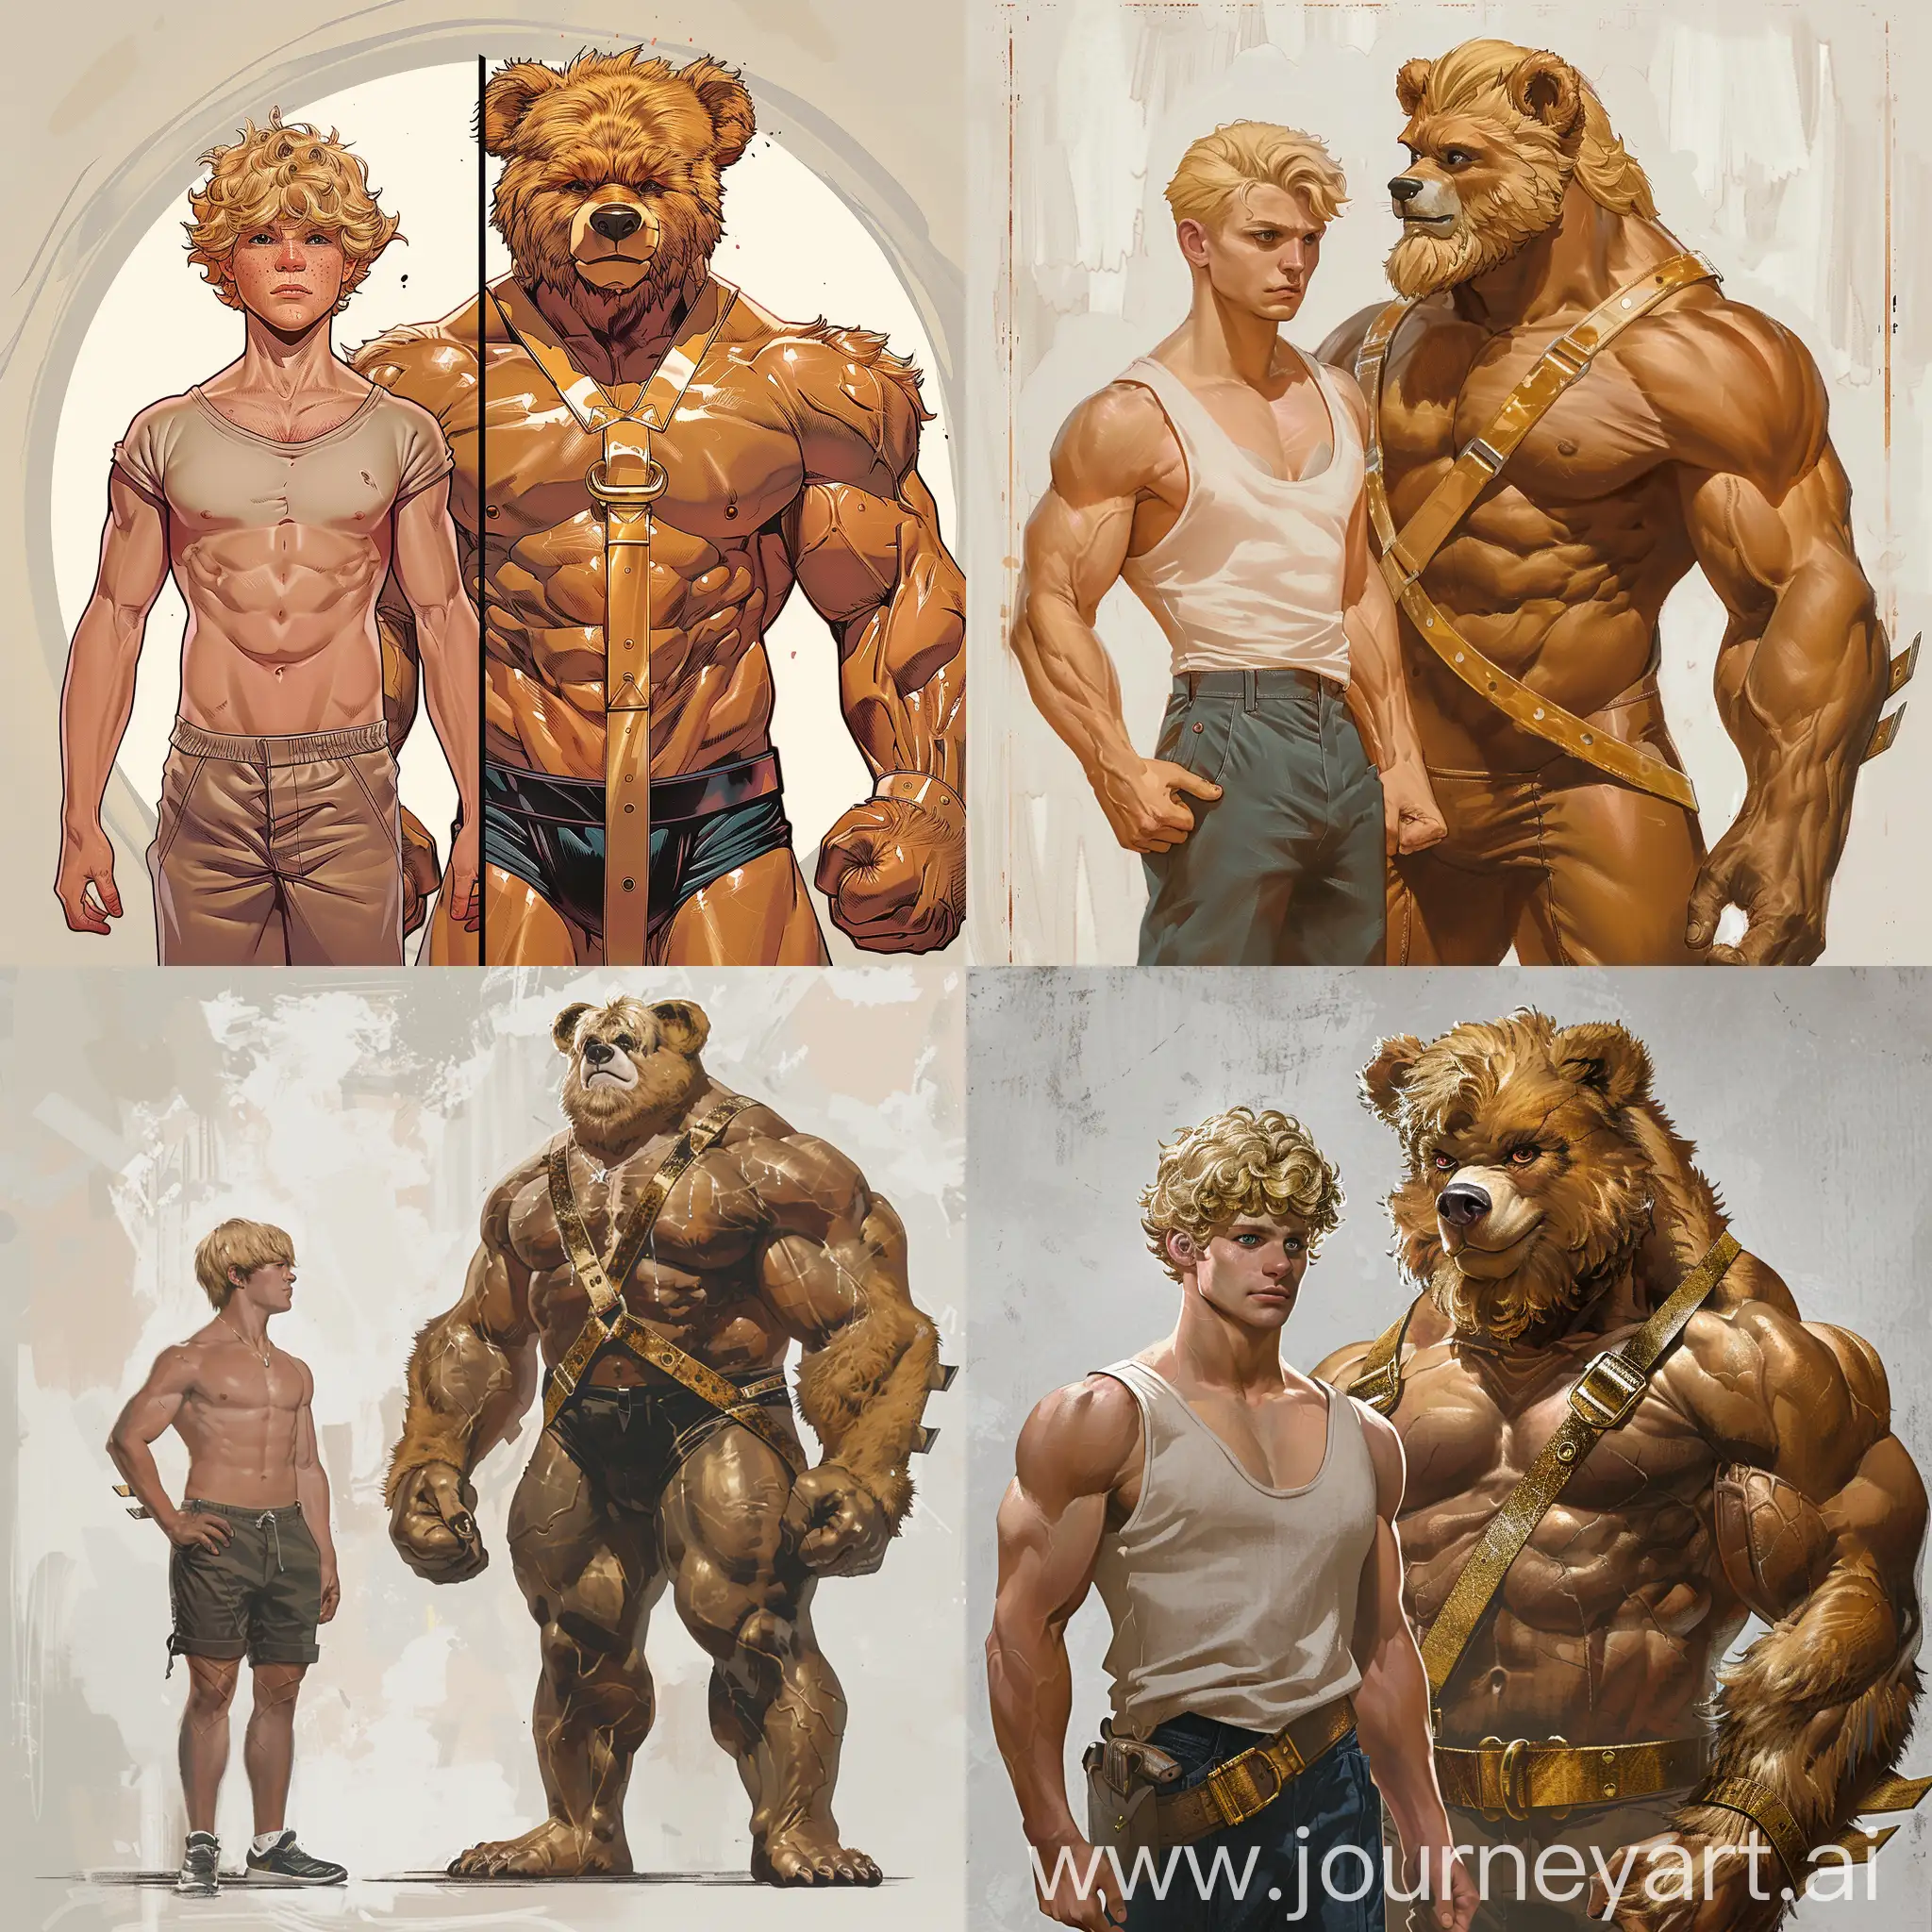 illustrate a scene depicting Wayne pre-transformation. He's a slender figure with unruly blond hair, wearing regular clothes and exuding an unassuming demeanor.

For the post-transformation scene, portray Wayne, now Cubbie, as a massive and muscular teen bodybuilder. Showcase the transformation from the slim, unassuming guy to the dominant, confident leather bear with a bushy blond beard, wearing a shiny gold posing strap.